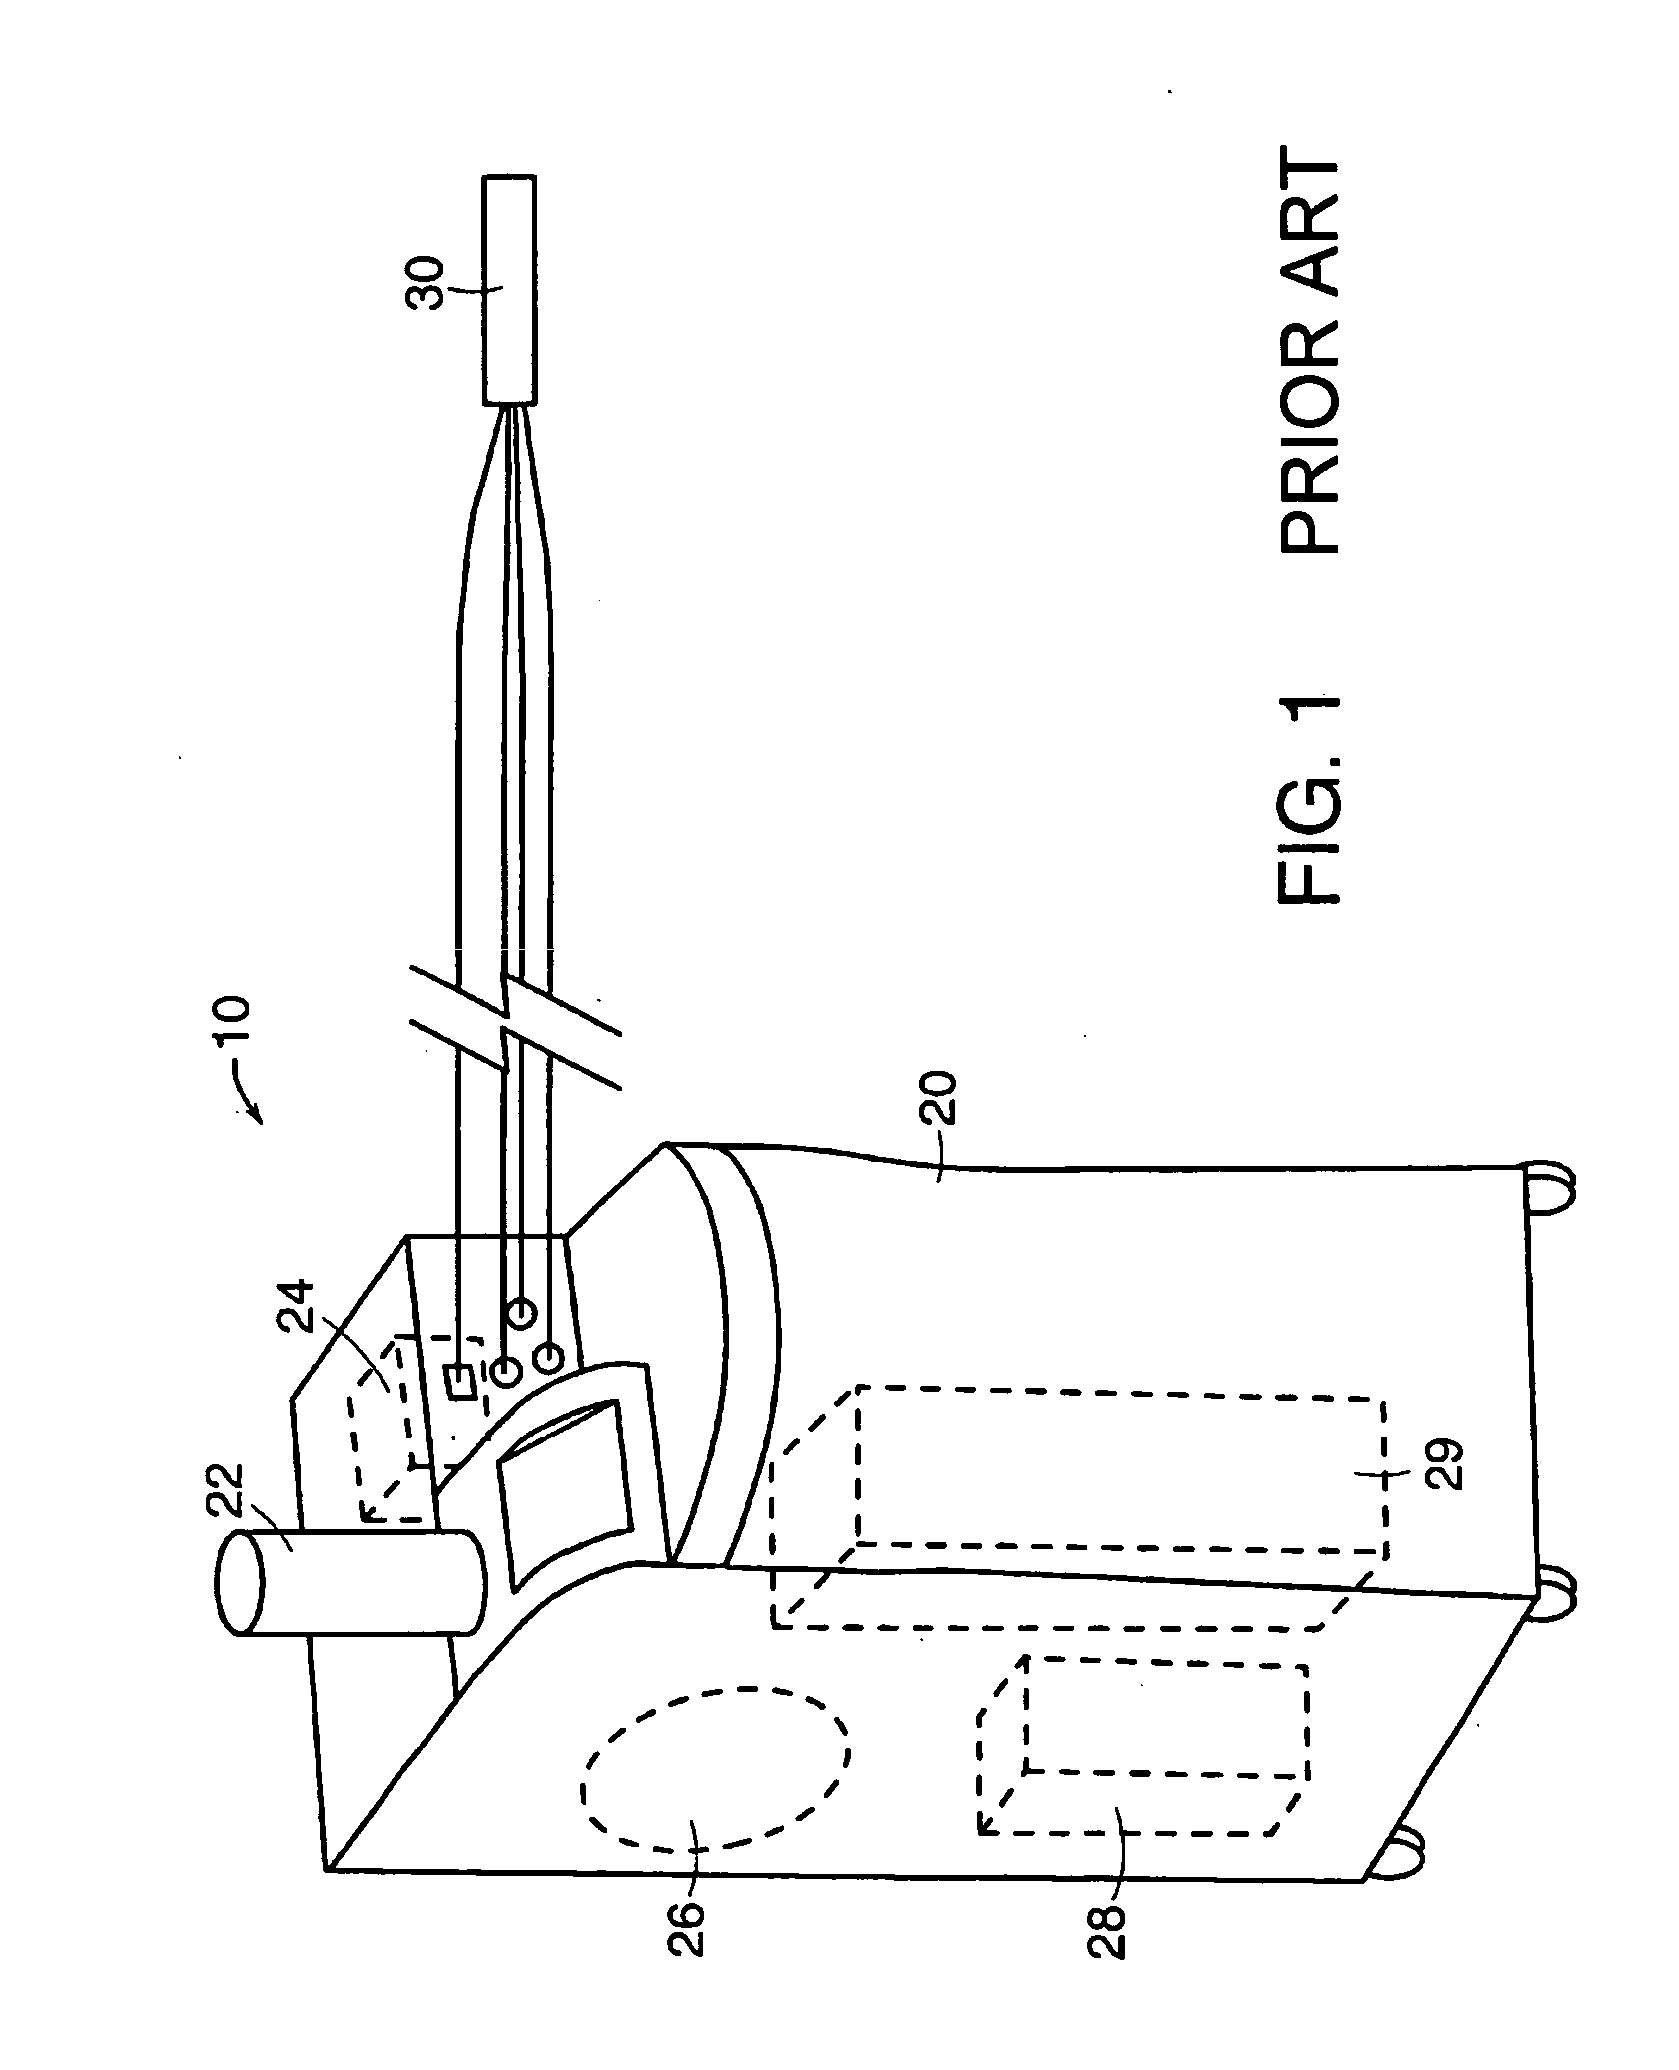 Treatment method and apparatus for basal cell carcinoma